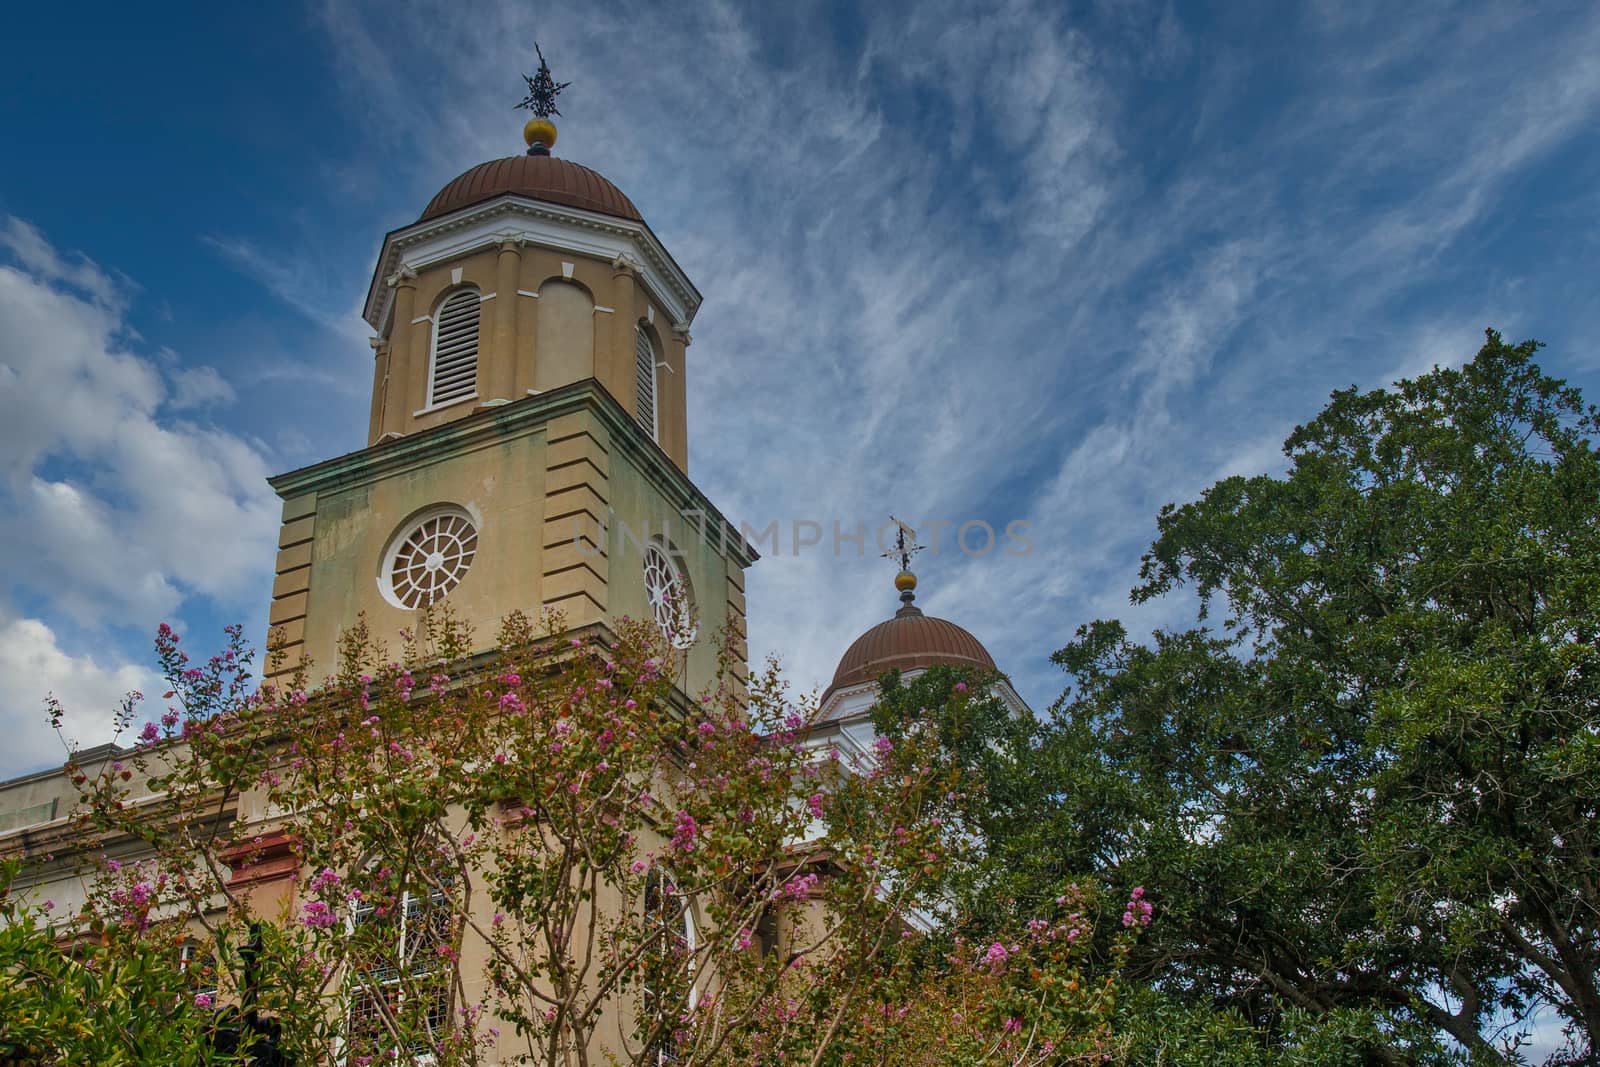 Stucco Church with Domed Steeples by dbvirago